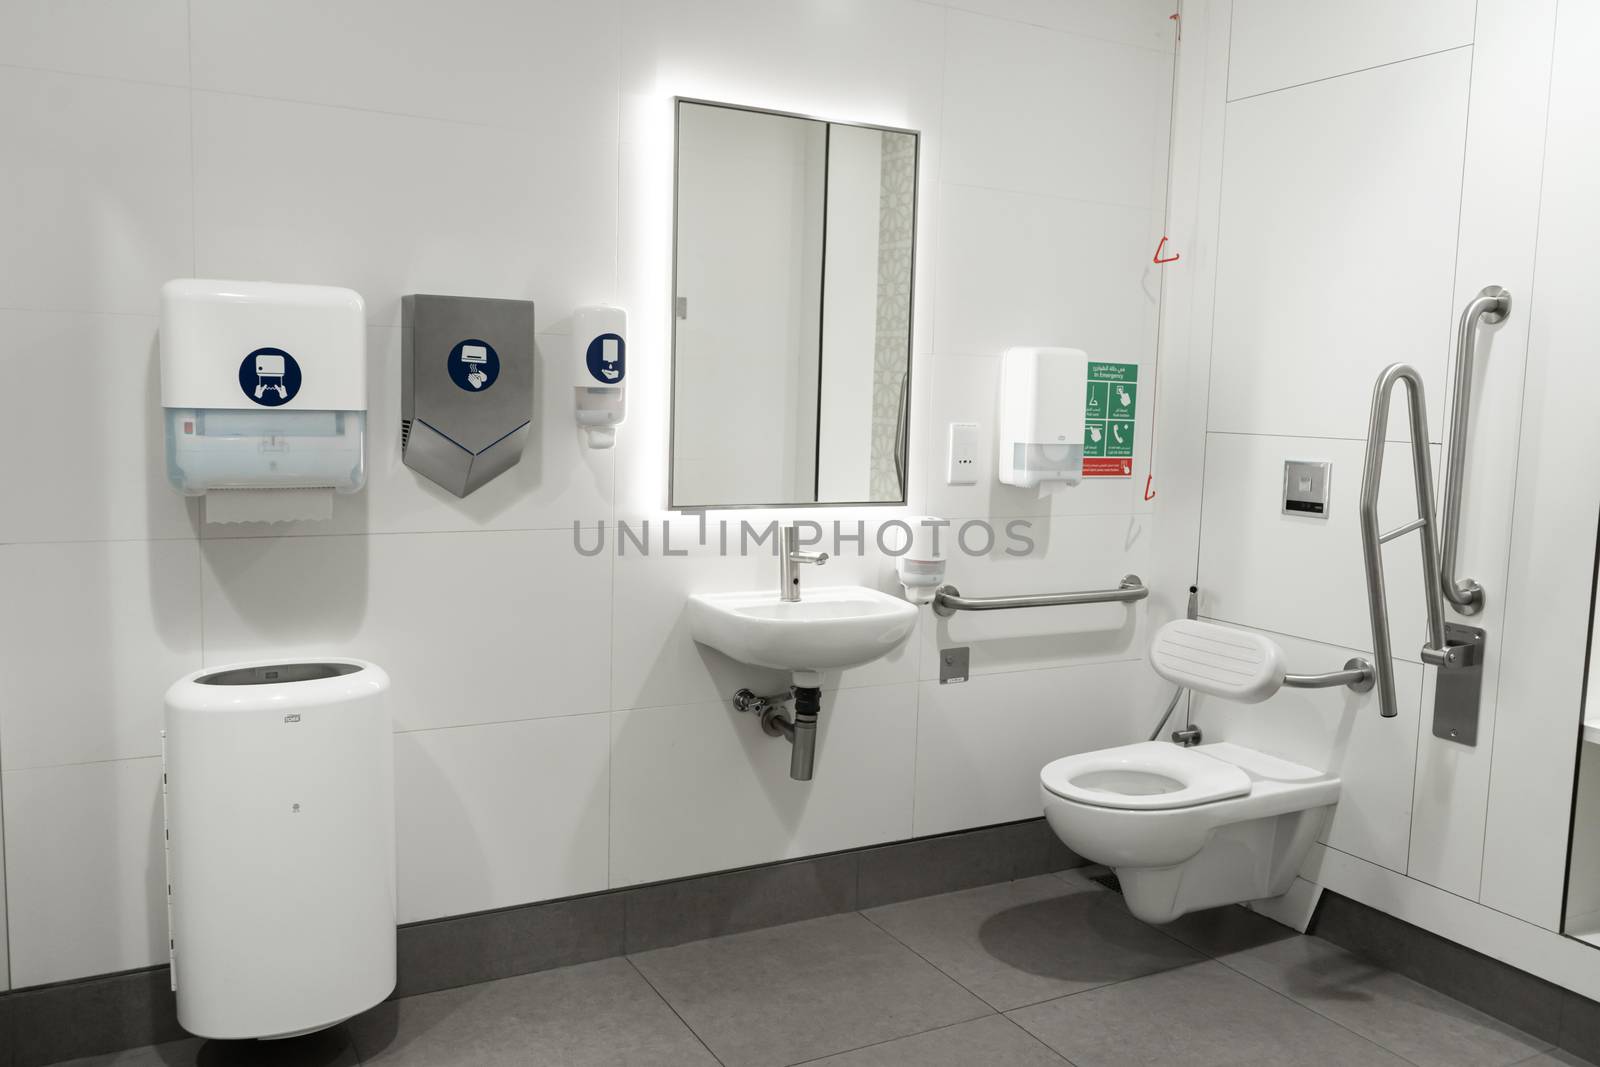 Restroom for people with disabilities in a modern country.